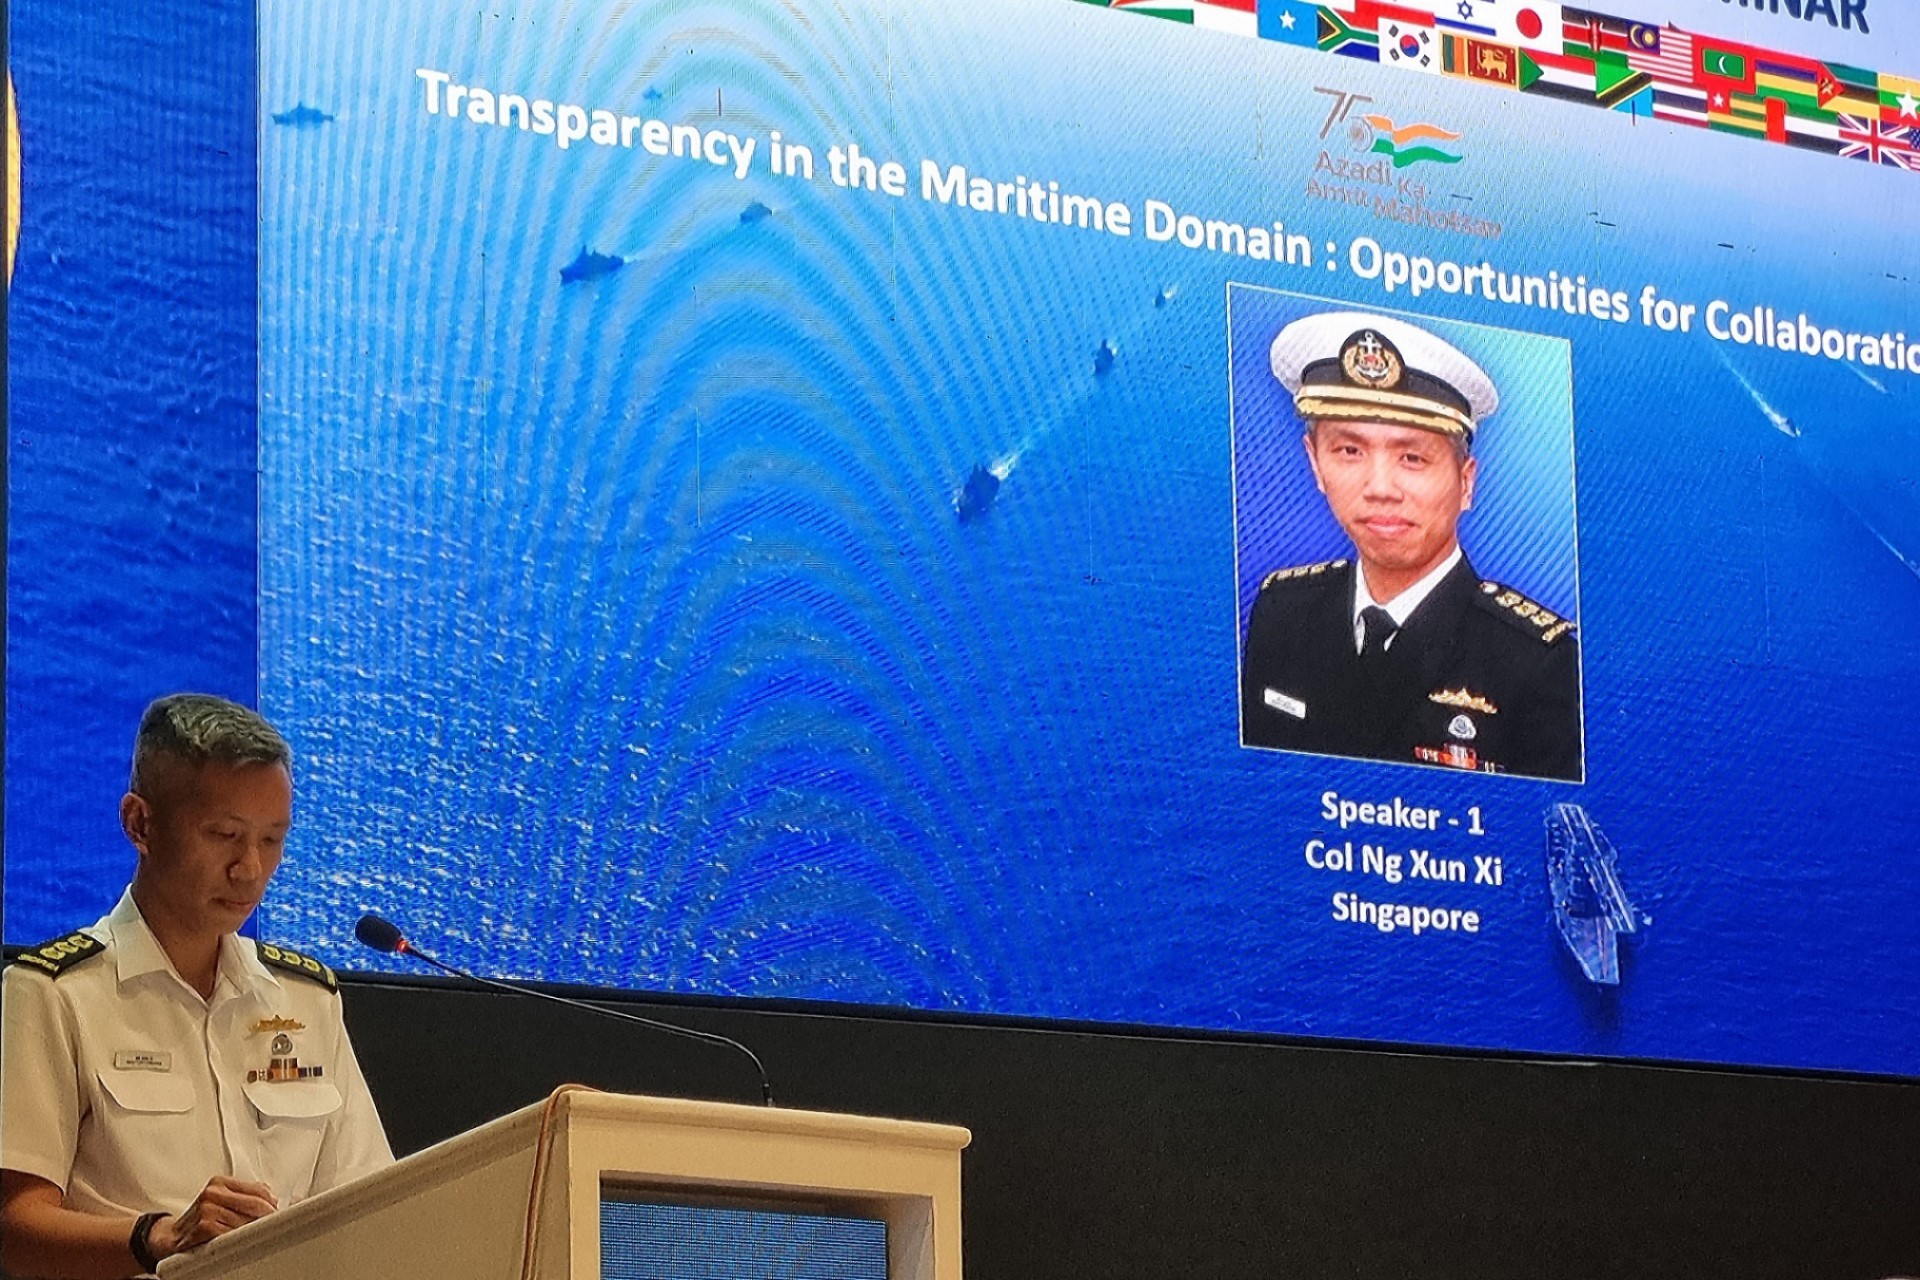 Deputy Fleet Commander, Colonel Ng Xun Xi, delivering his speech on the topic "Transparency in the Maritime Domain: Opportunities for Collaboration and Partnerships" during the International Maritime Seminar.